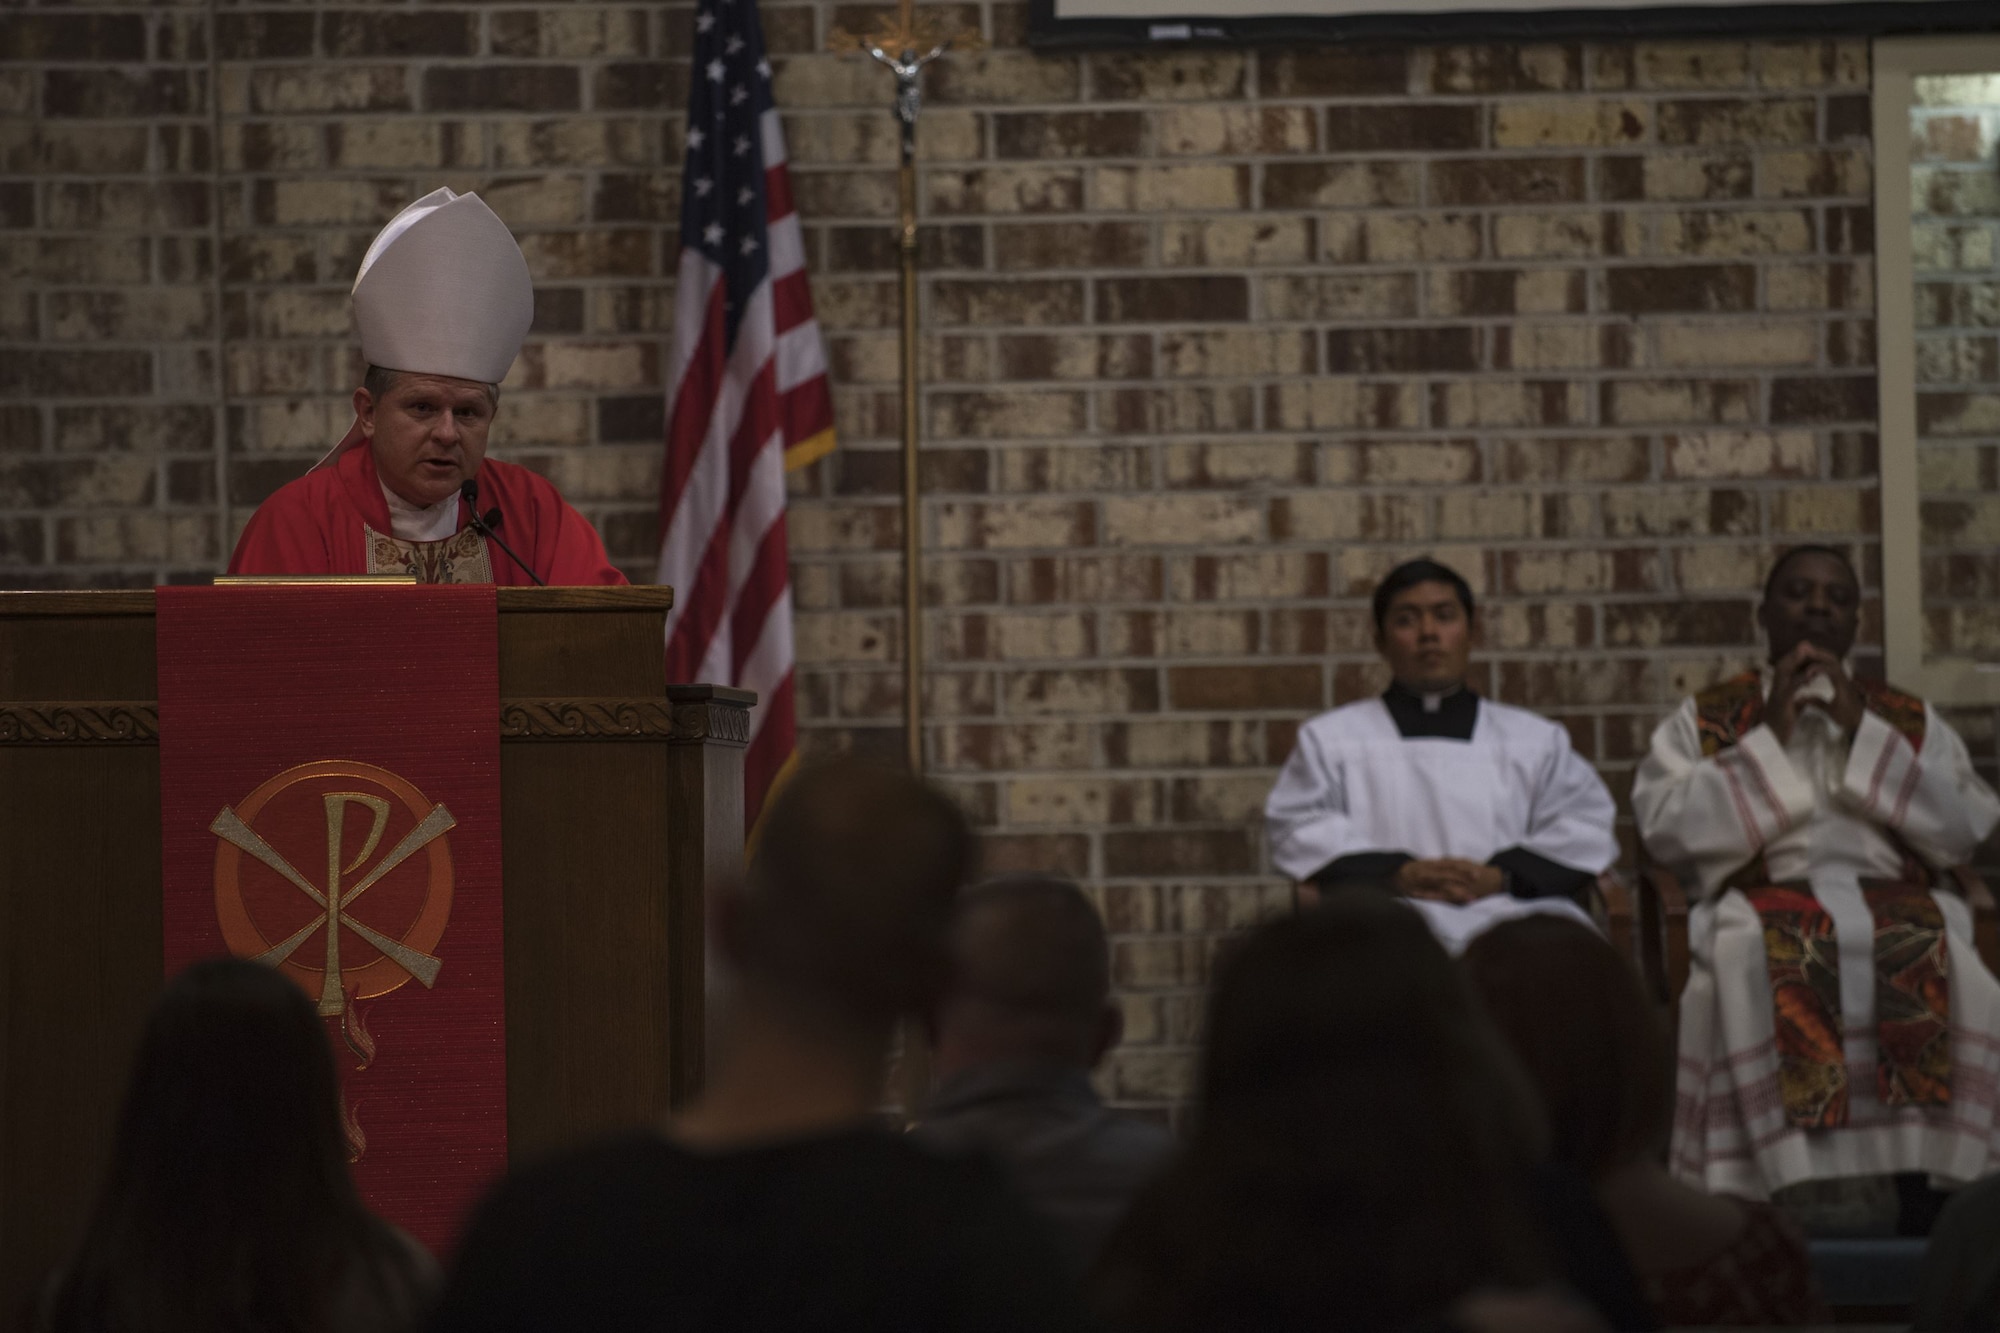 Bishop Robert J. Coyle, Archdiocese of the Military Services, addresses a sanctuary of people, shortly before performing a Sacrament of Confirmation ceremony, Feb. 12, 2018, at Moody Air Force Base, Ga. Confirmation is the sacrament by which Catholics believe the Holy Spirit gives them the increased ability to practice their faith in every aspect of their lives and to witness Christ in every situation.  The Sacrament of Confirmation helps a person remain faithful to his or her baptismal commitment to witness to Christ and to serve others. (U.S. Air Force photo by Senior Airman Daniel Snider)